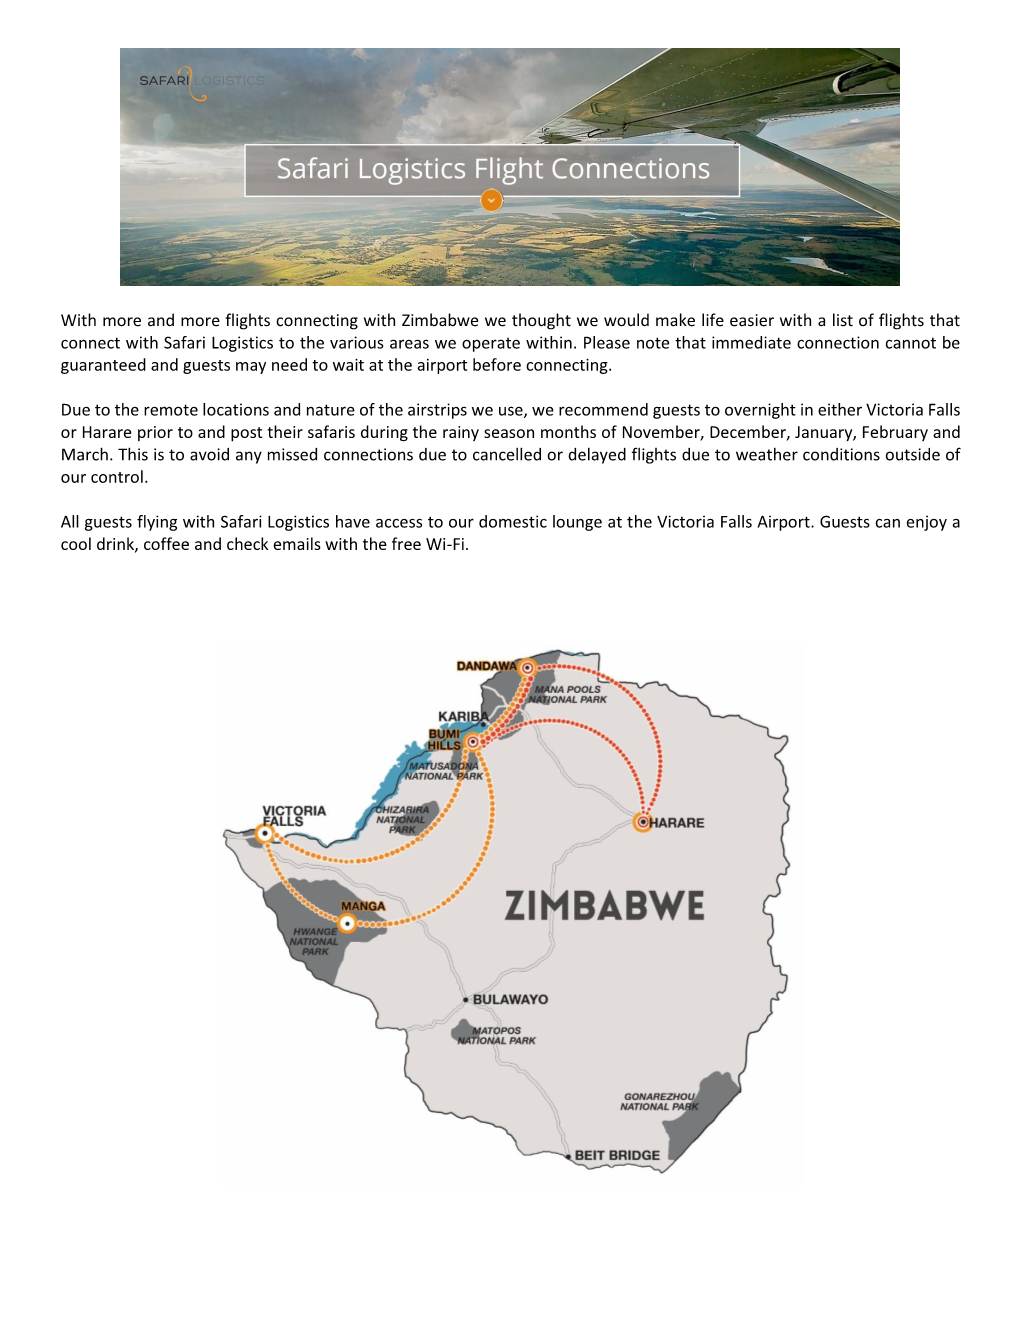 With More and More Flights Connecting with Zimbabwe We